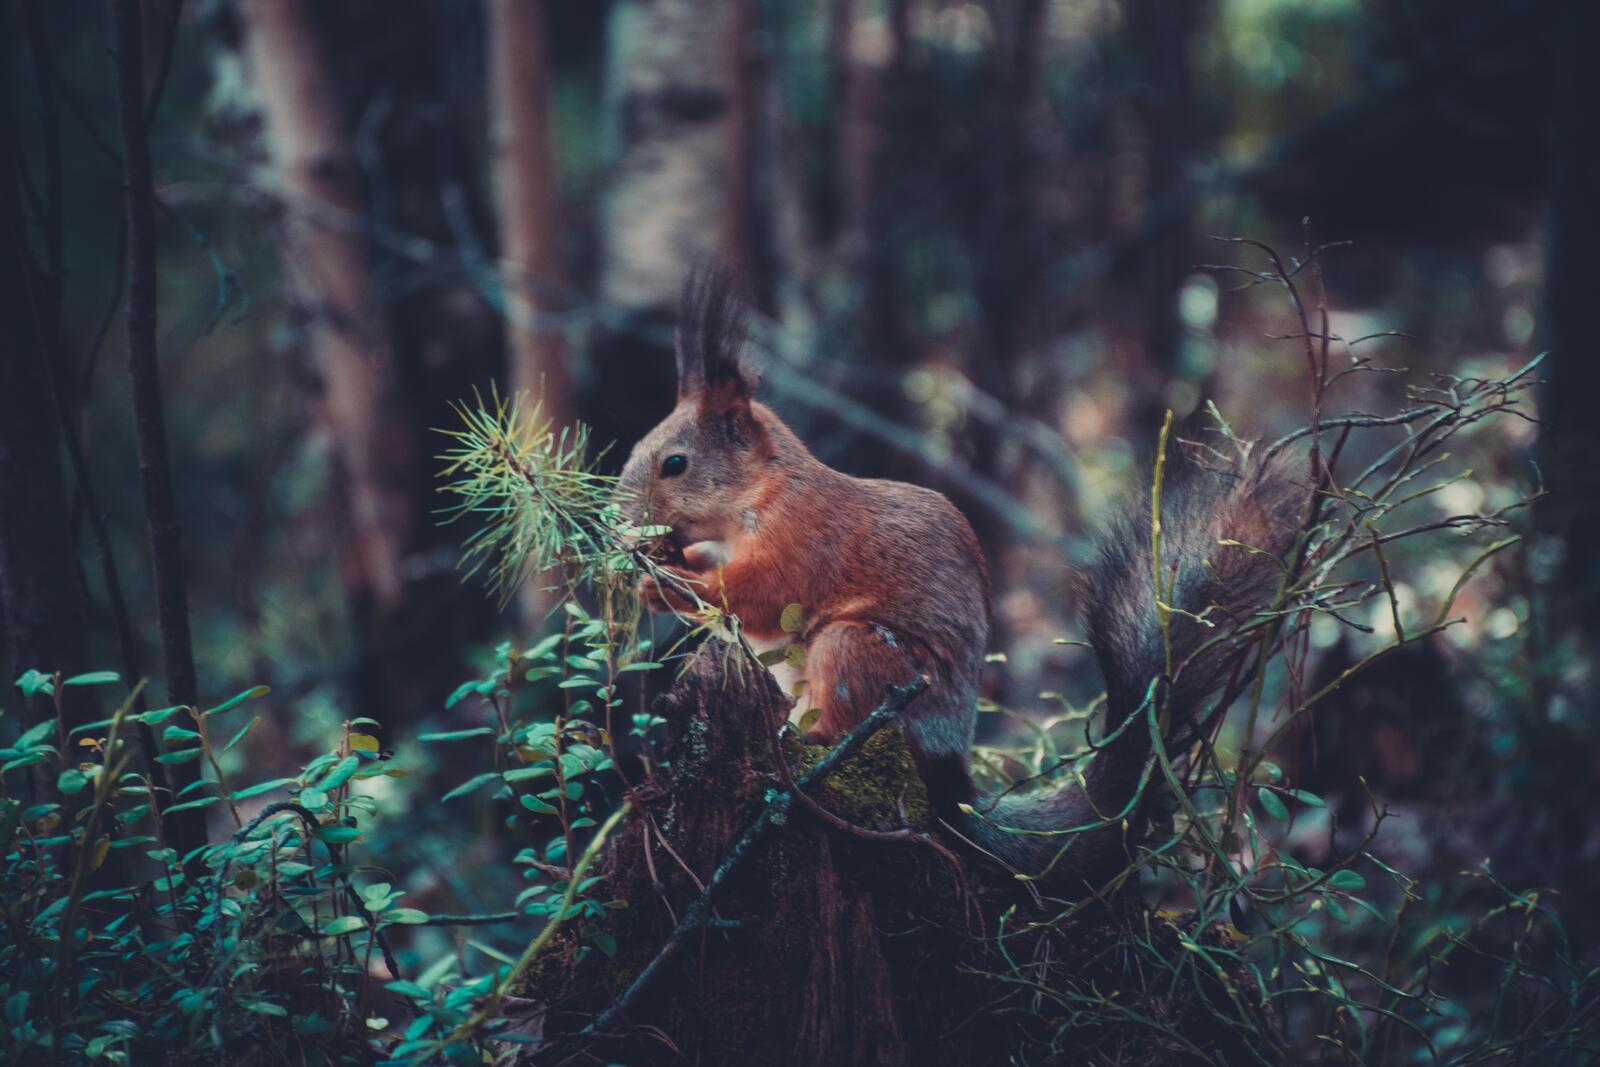 Free photo A red squirrel sitting on a stump in the woods